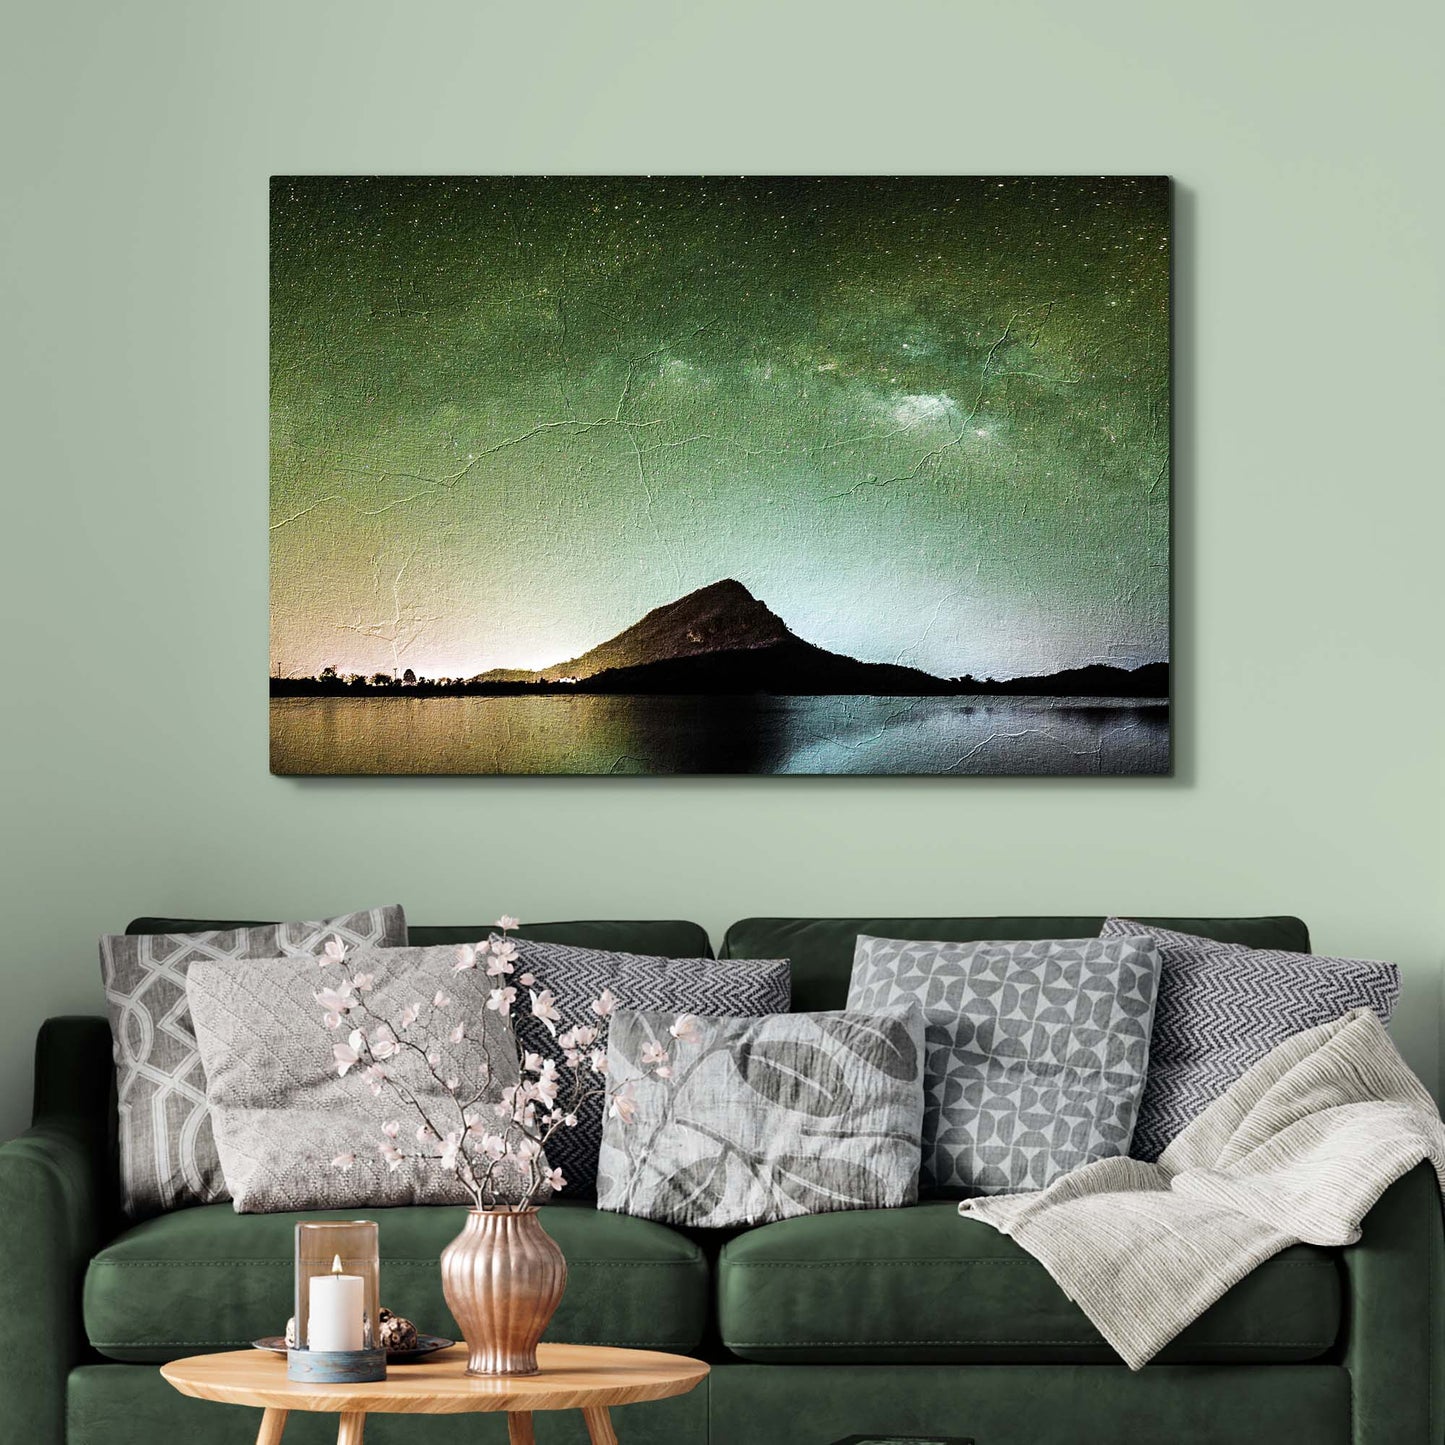 Wash Out Night Sky Canvas Wall Art Style 2 - Image by Tailored Canvases